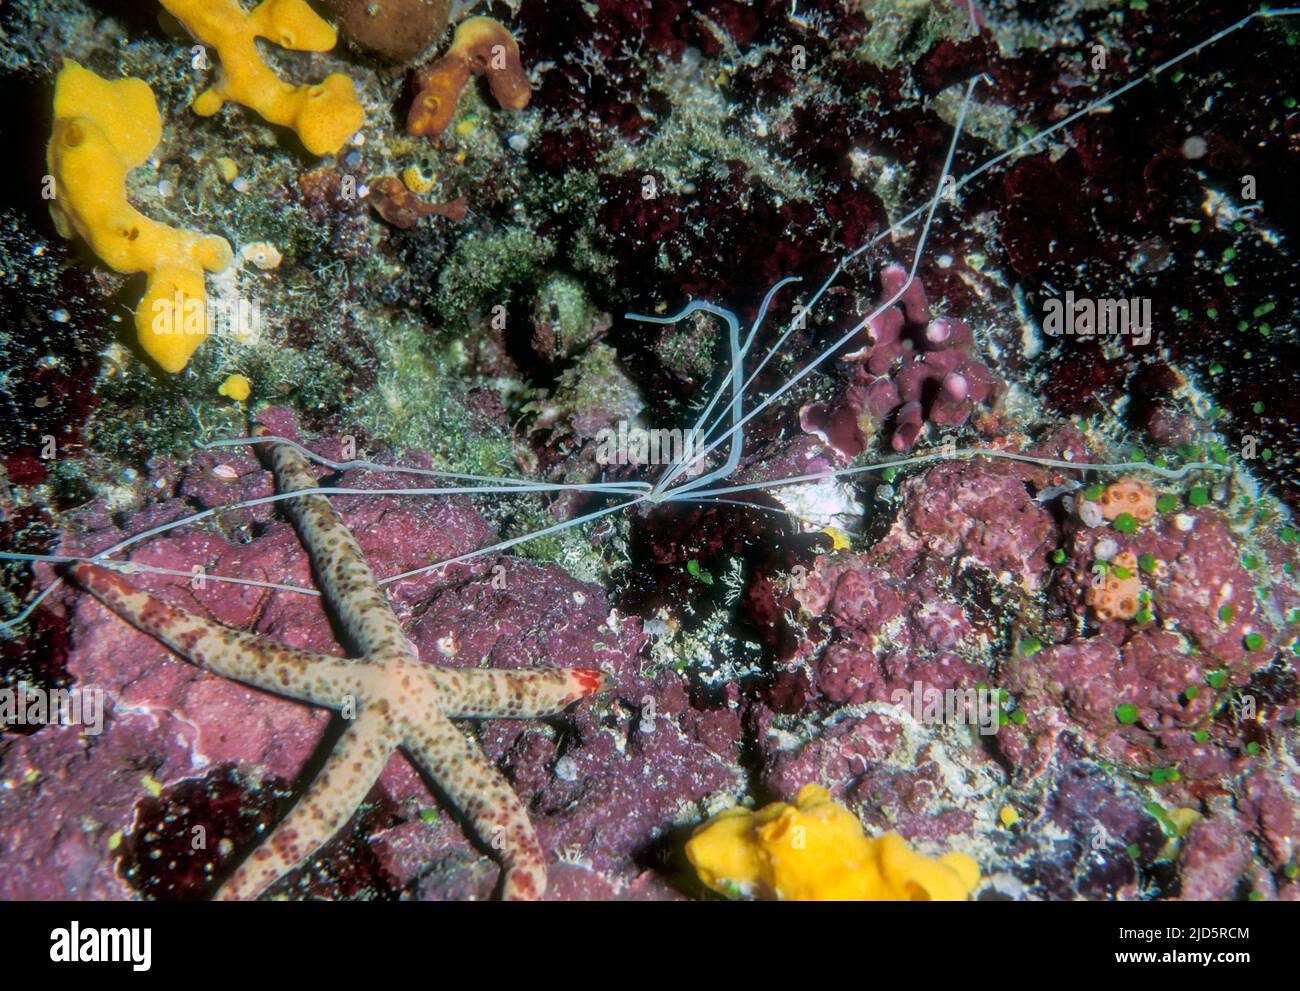 The long tentacles of the spaghetti worm Retetrebella queenslandica photographed in a reef slope in the Maldives. The worm itself is buried oin the re Stock Photo